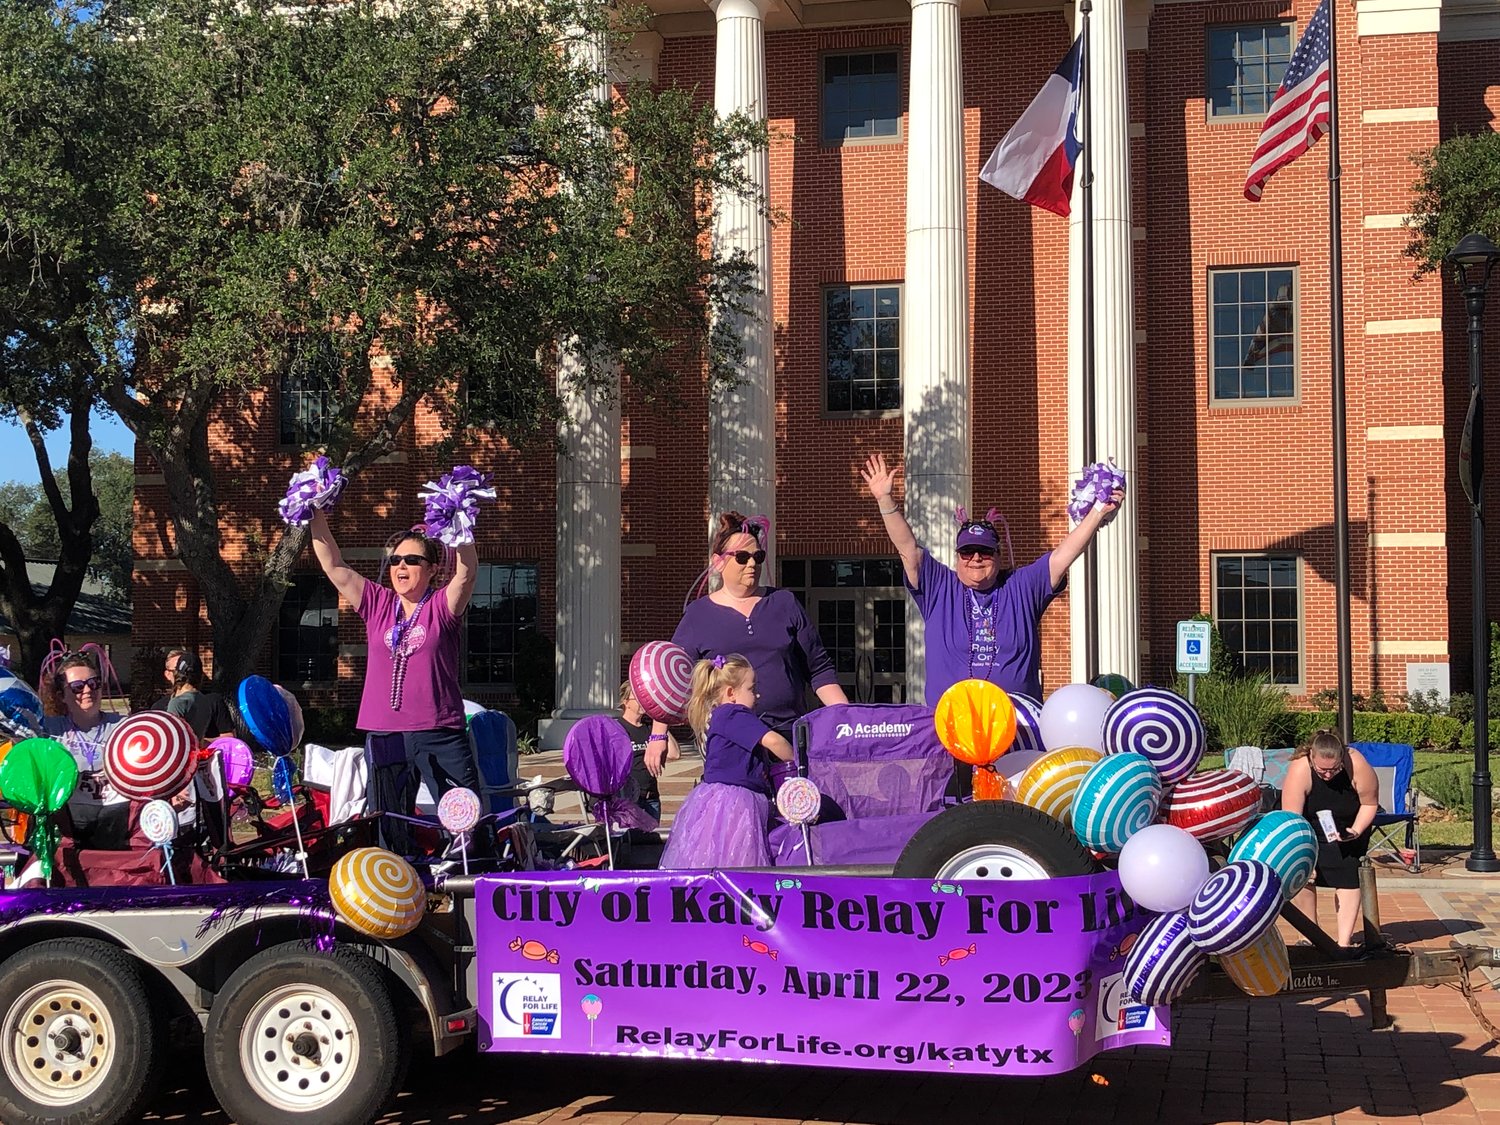 The Katy Relay for Life is set for April 22, 2023, but as its volunteers will attest, it's never too early to call attention to a worthy cause.